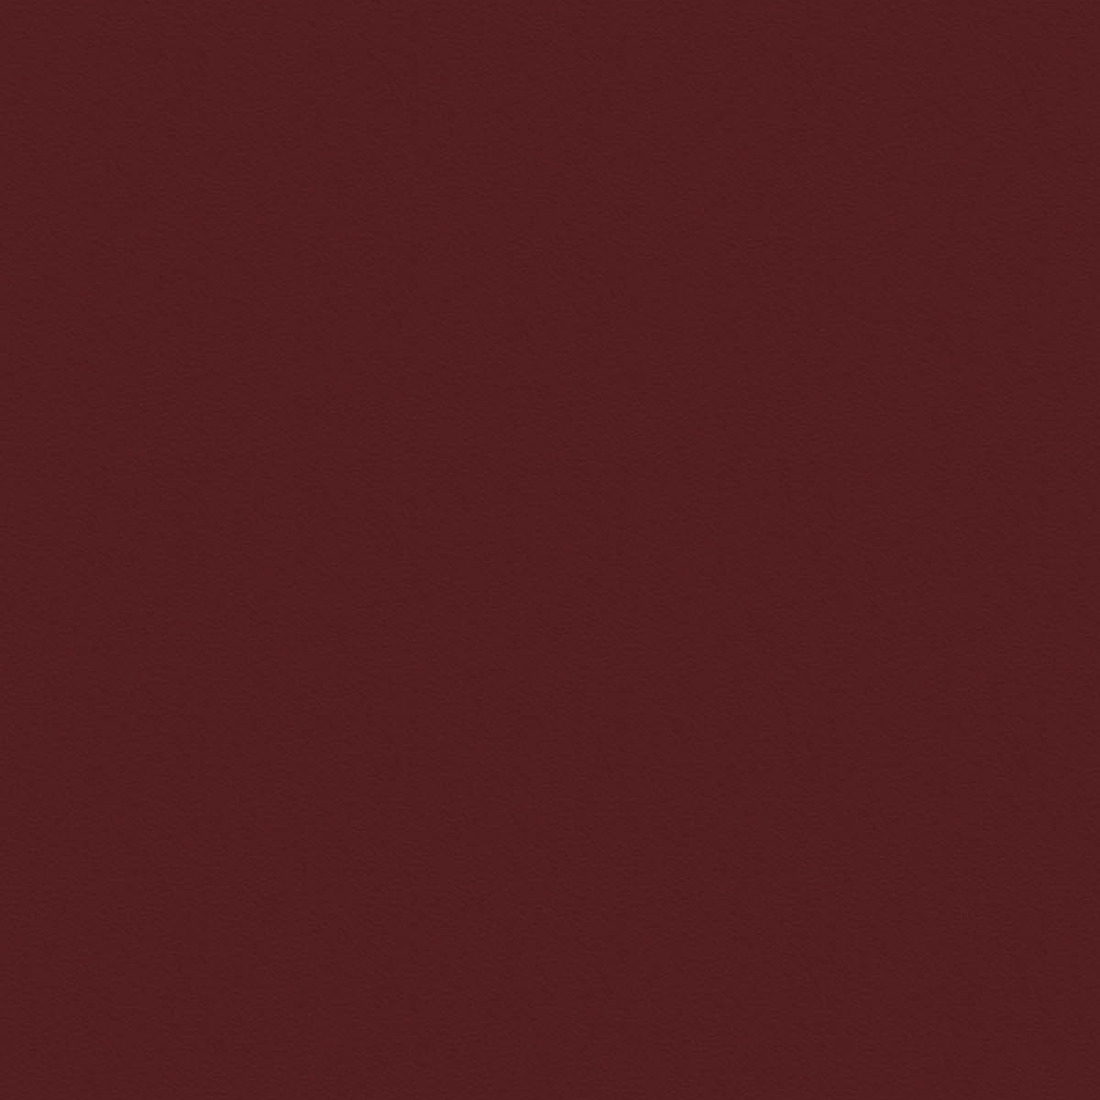 High Resolution Wallpaper | Red Bordeaux 1100x1100 px